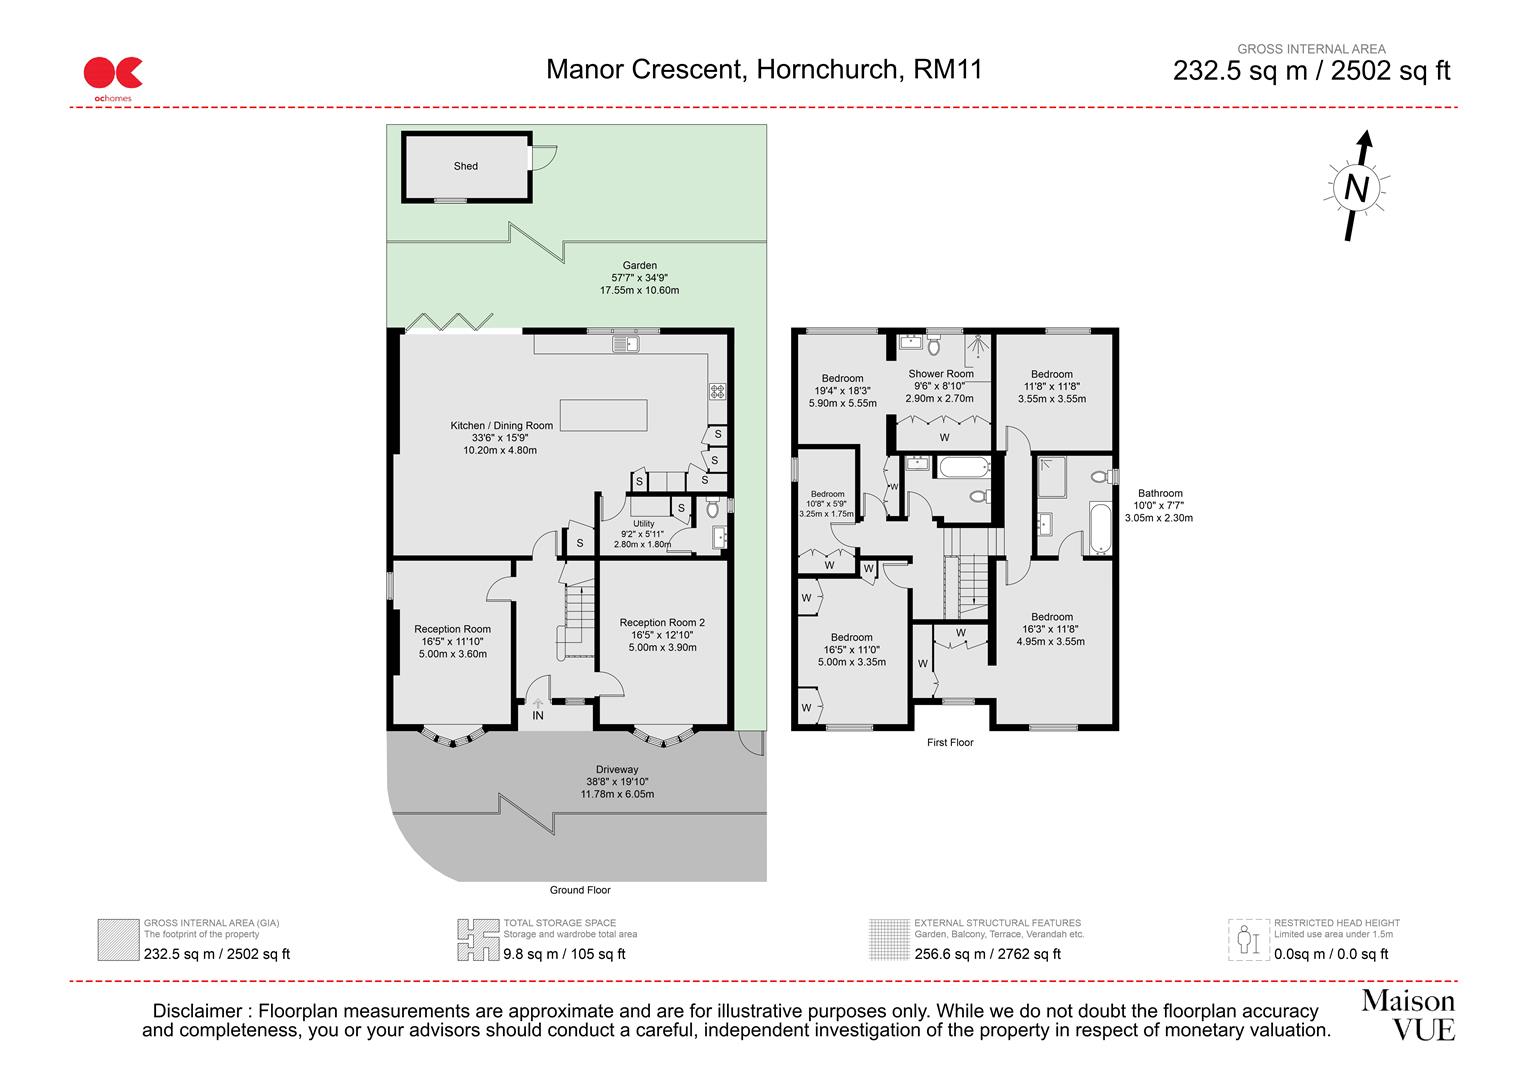 5 bed detached house for sale in Manor Crescent, Hornchurch - Property floorplan